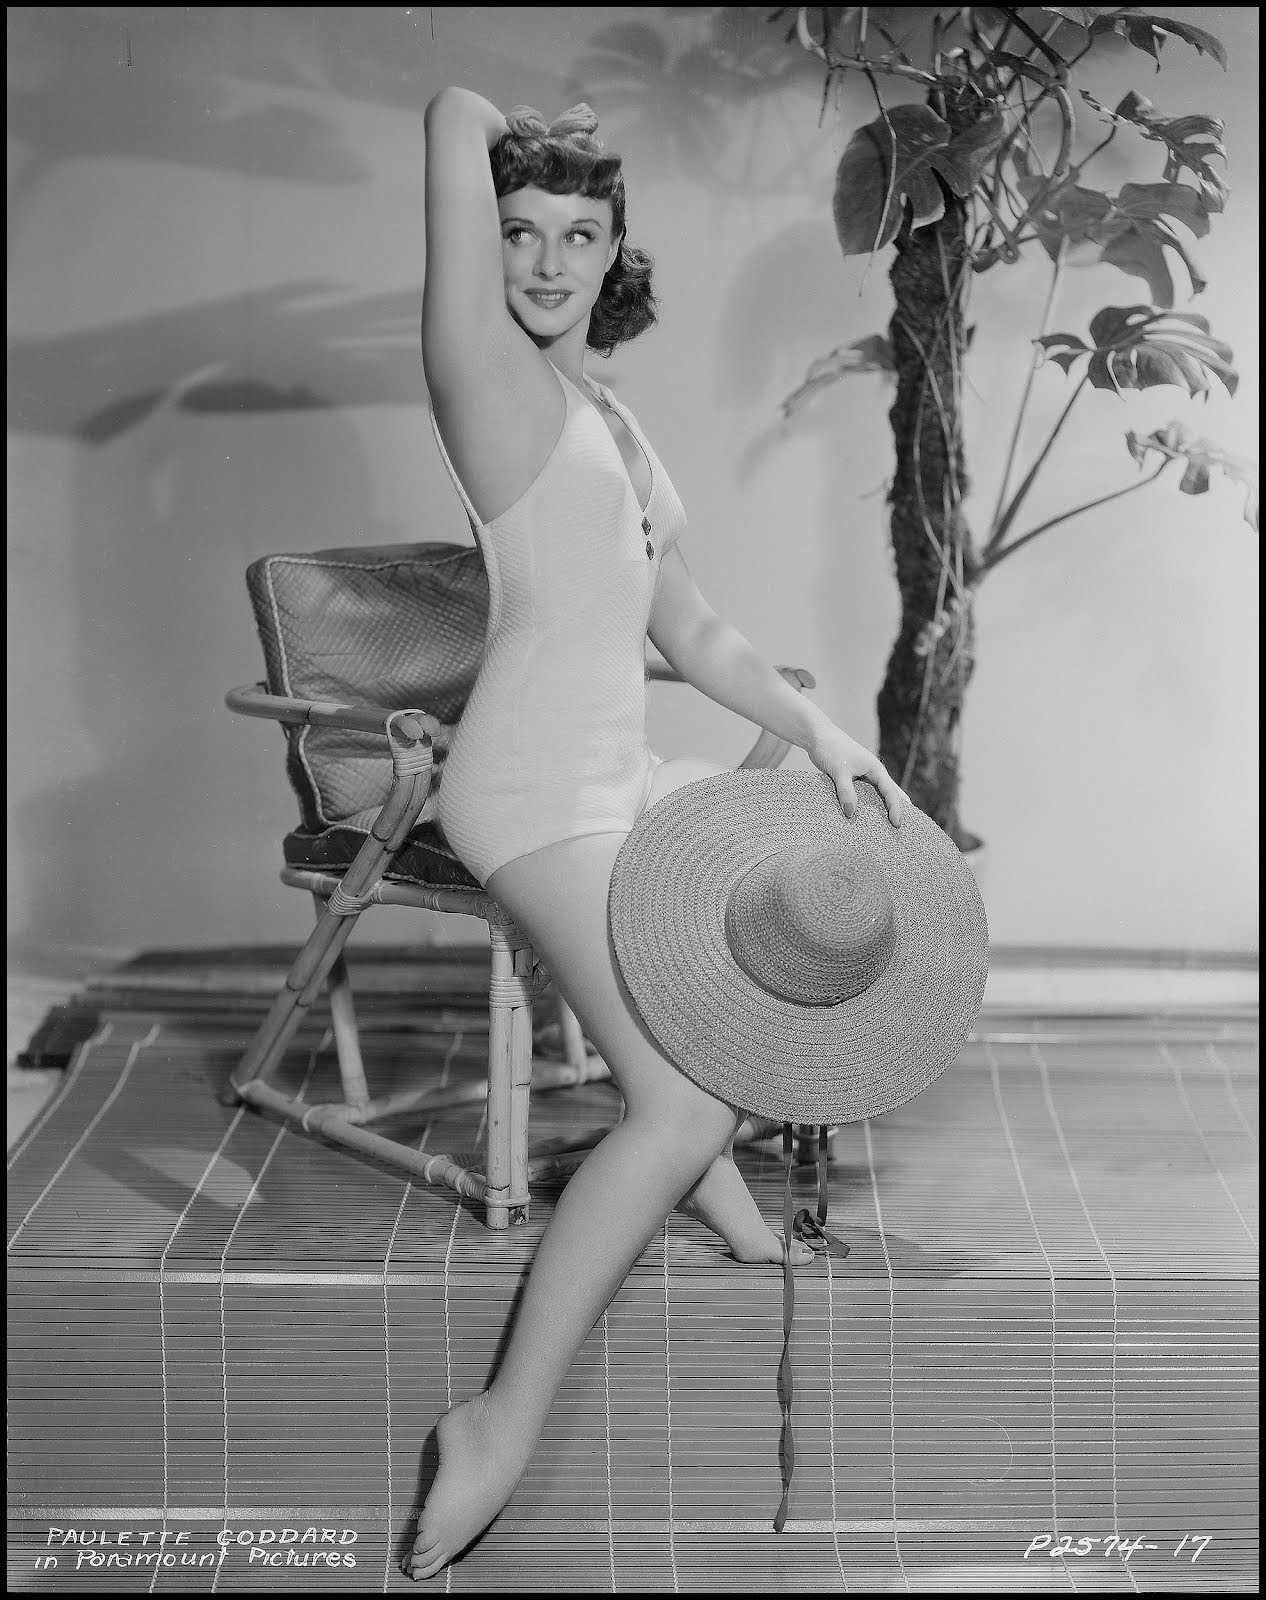 51 Hottest Paulette Goddard Bikini Pictures Which Are Inconceivably Beguiling 25